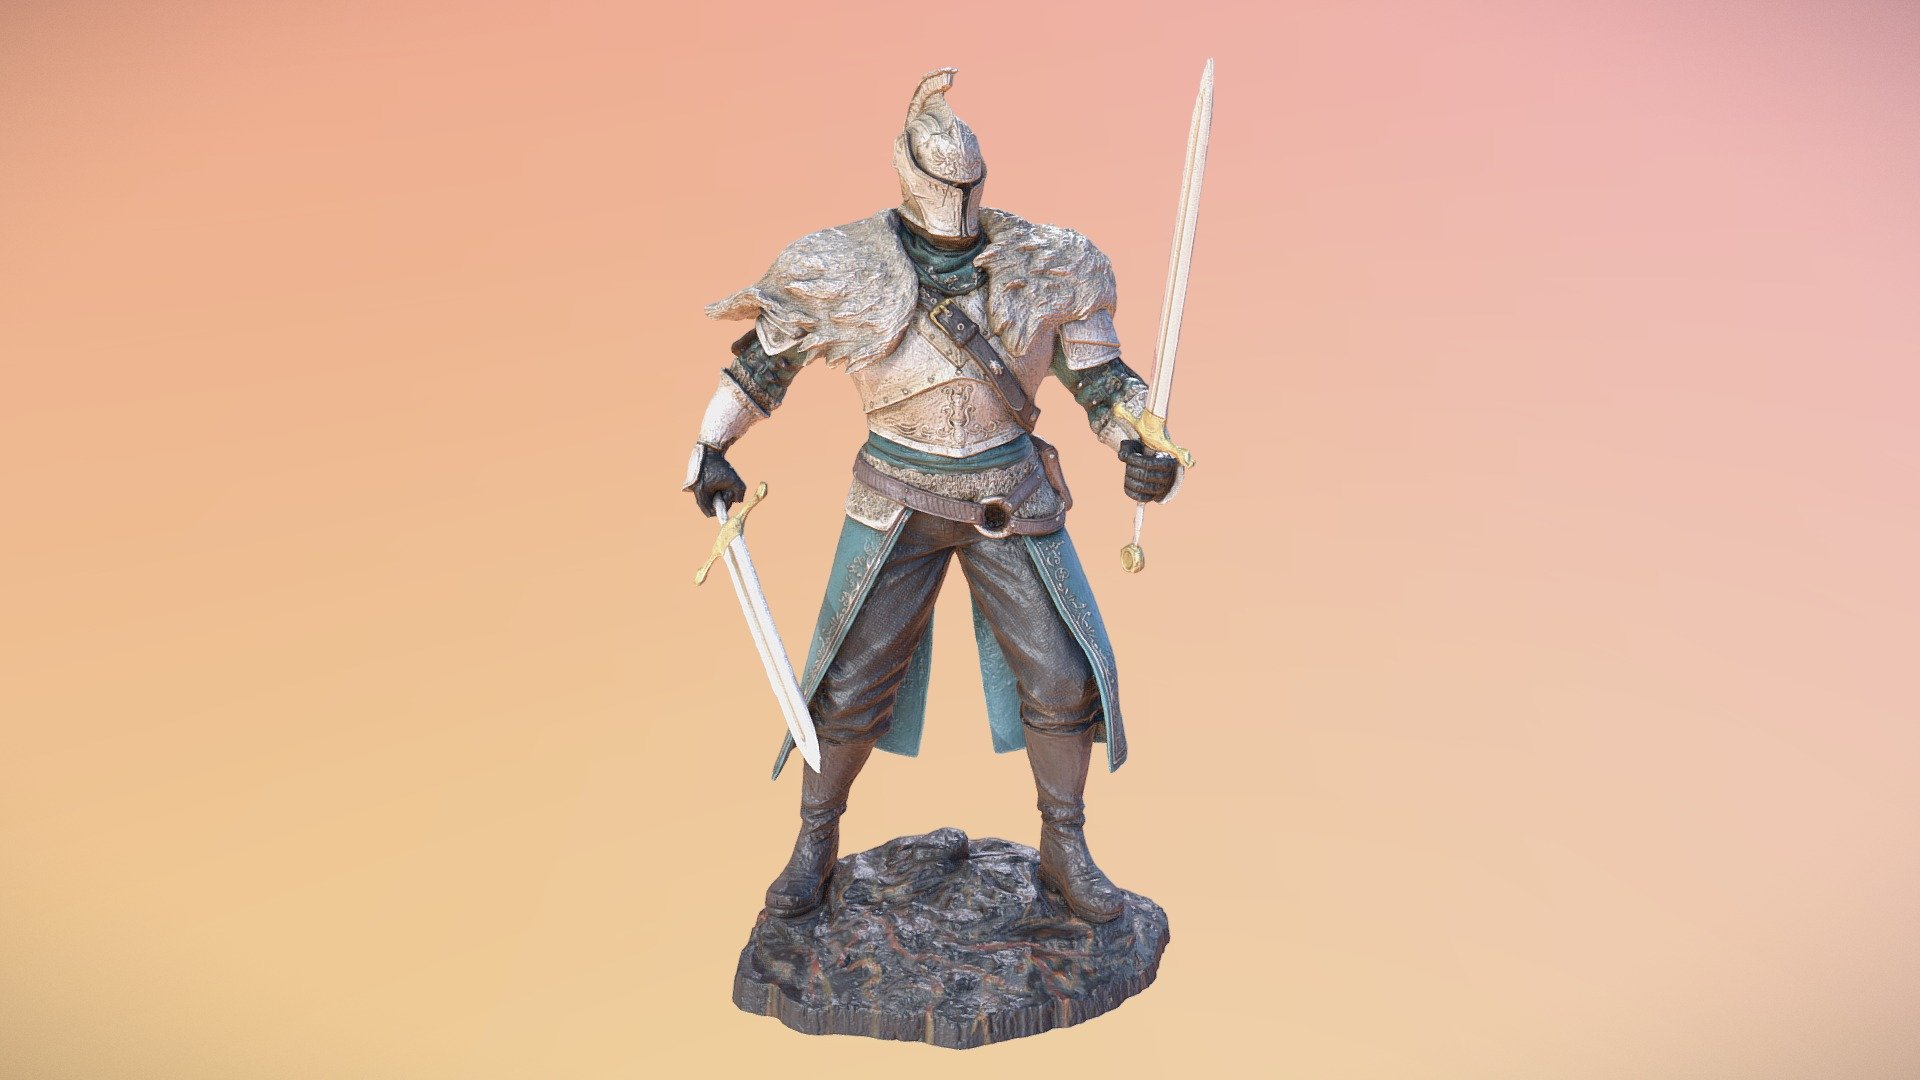 Warrior Toy. A good reference or gameobject to a computer game. 

Photogrammetry from 435 photos 3d model